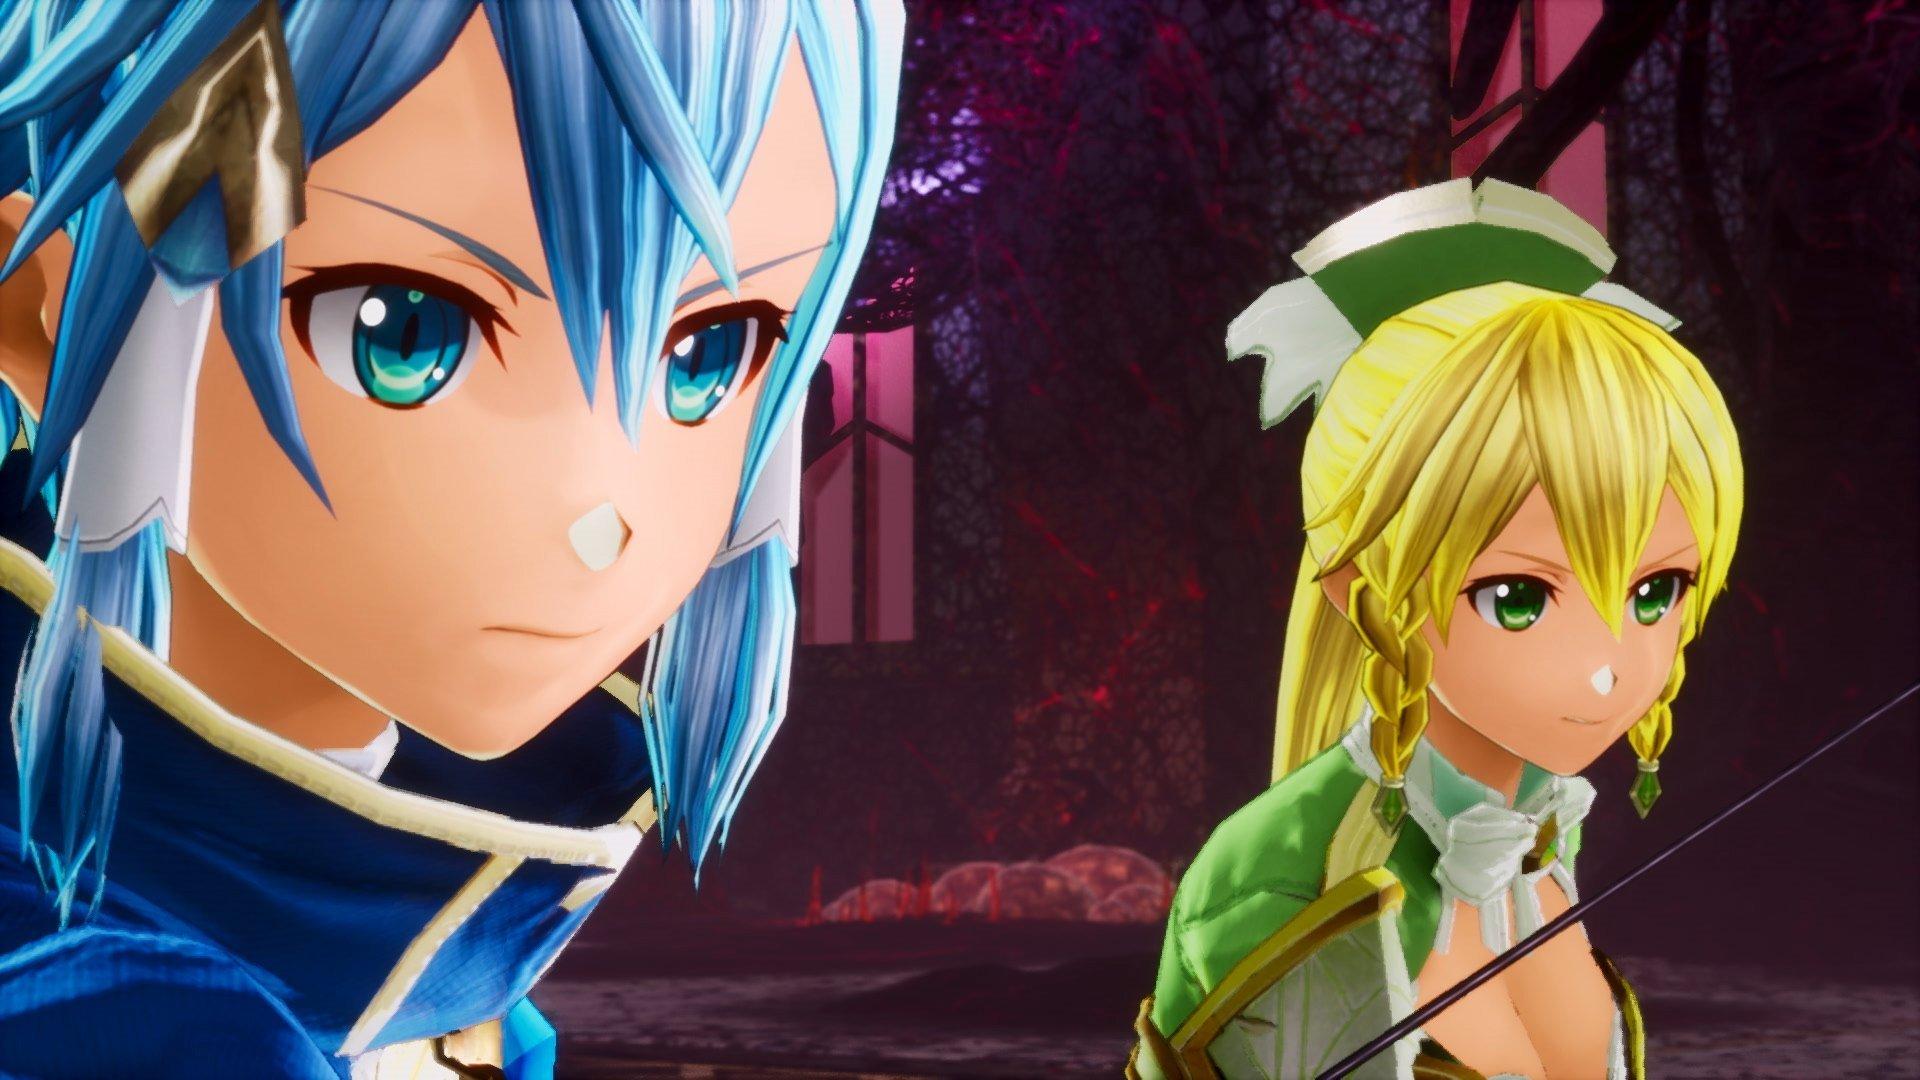 Sword Art Online Last Recollection Compared vs Alicization Lycoris on PS5 &  PS4 Pro in New Video